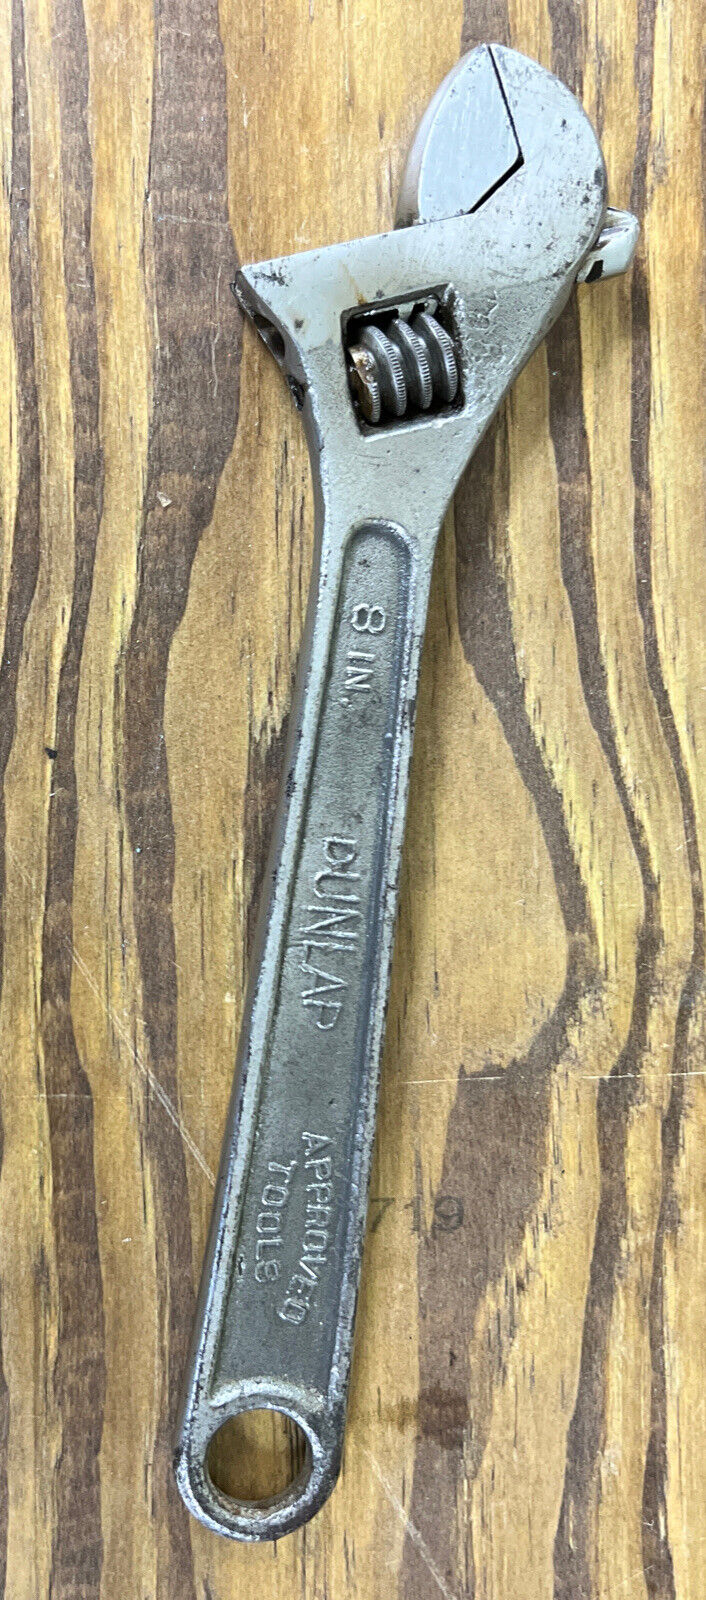 Vintage Dunlap Wrench 8 Inch Adjustable USA Approved Tools